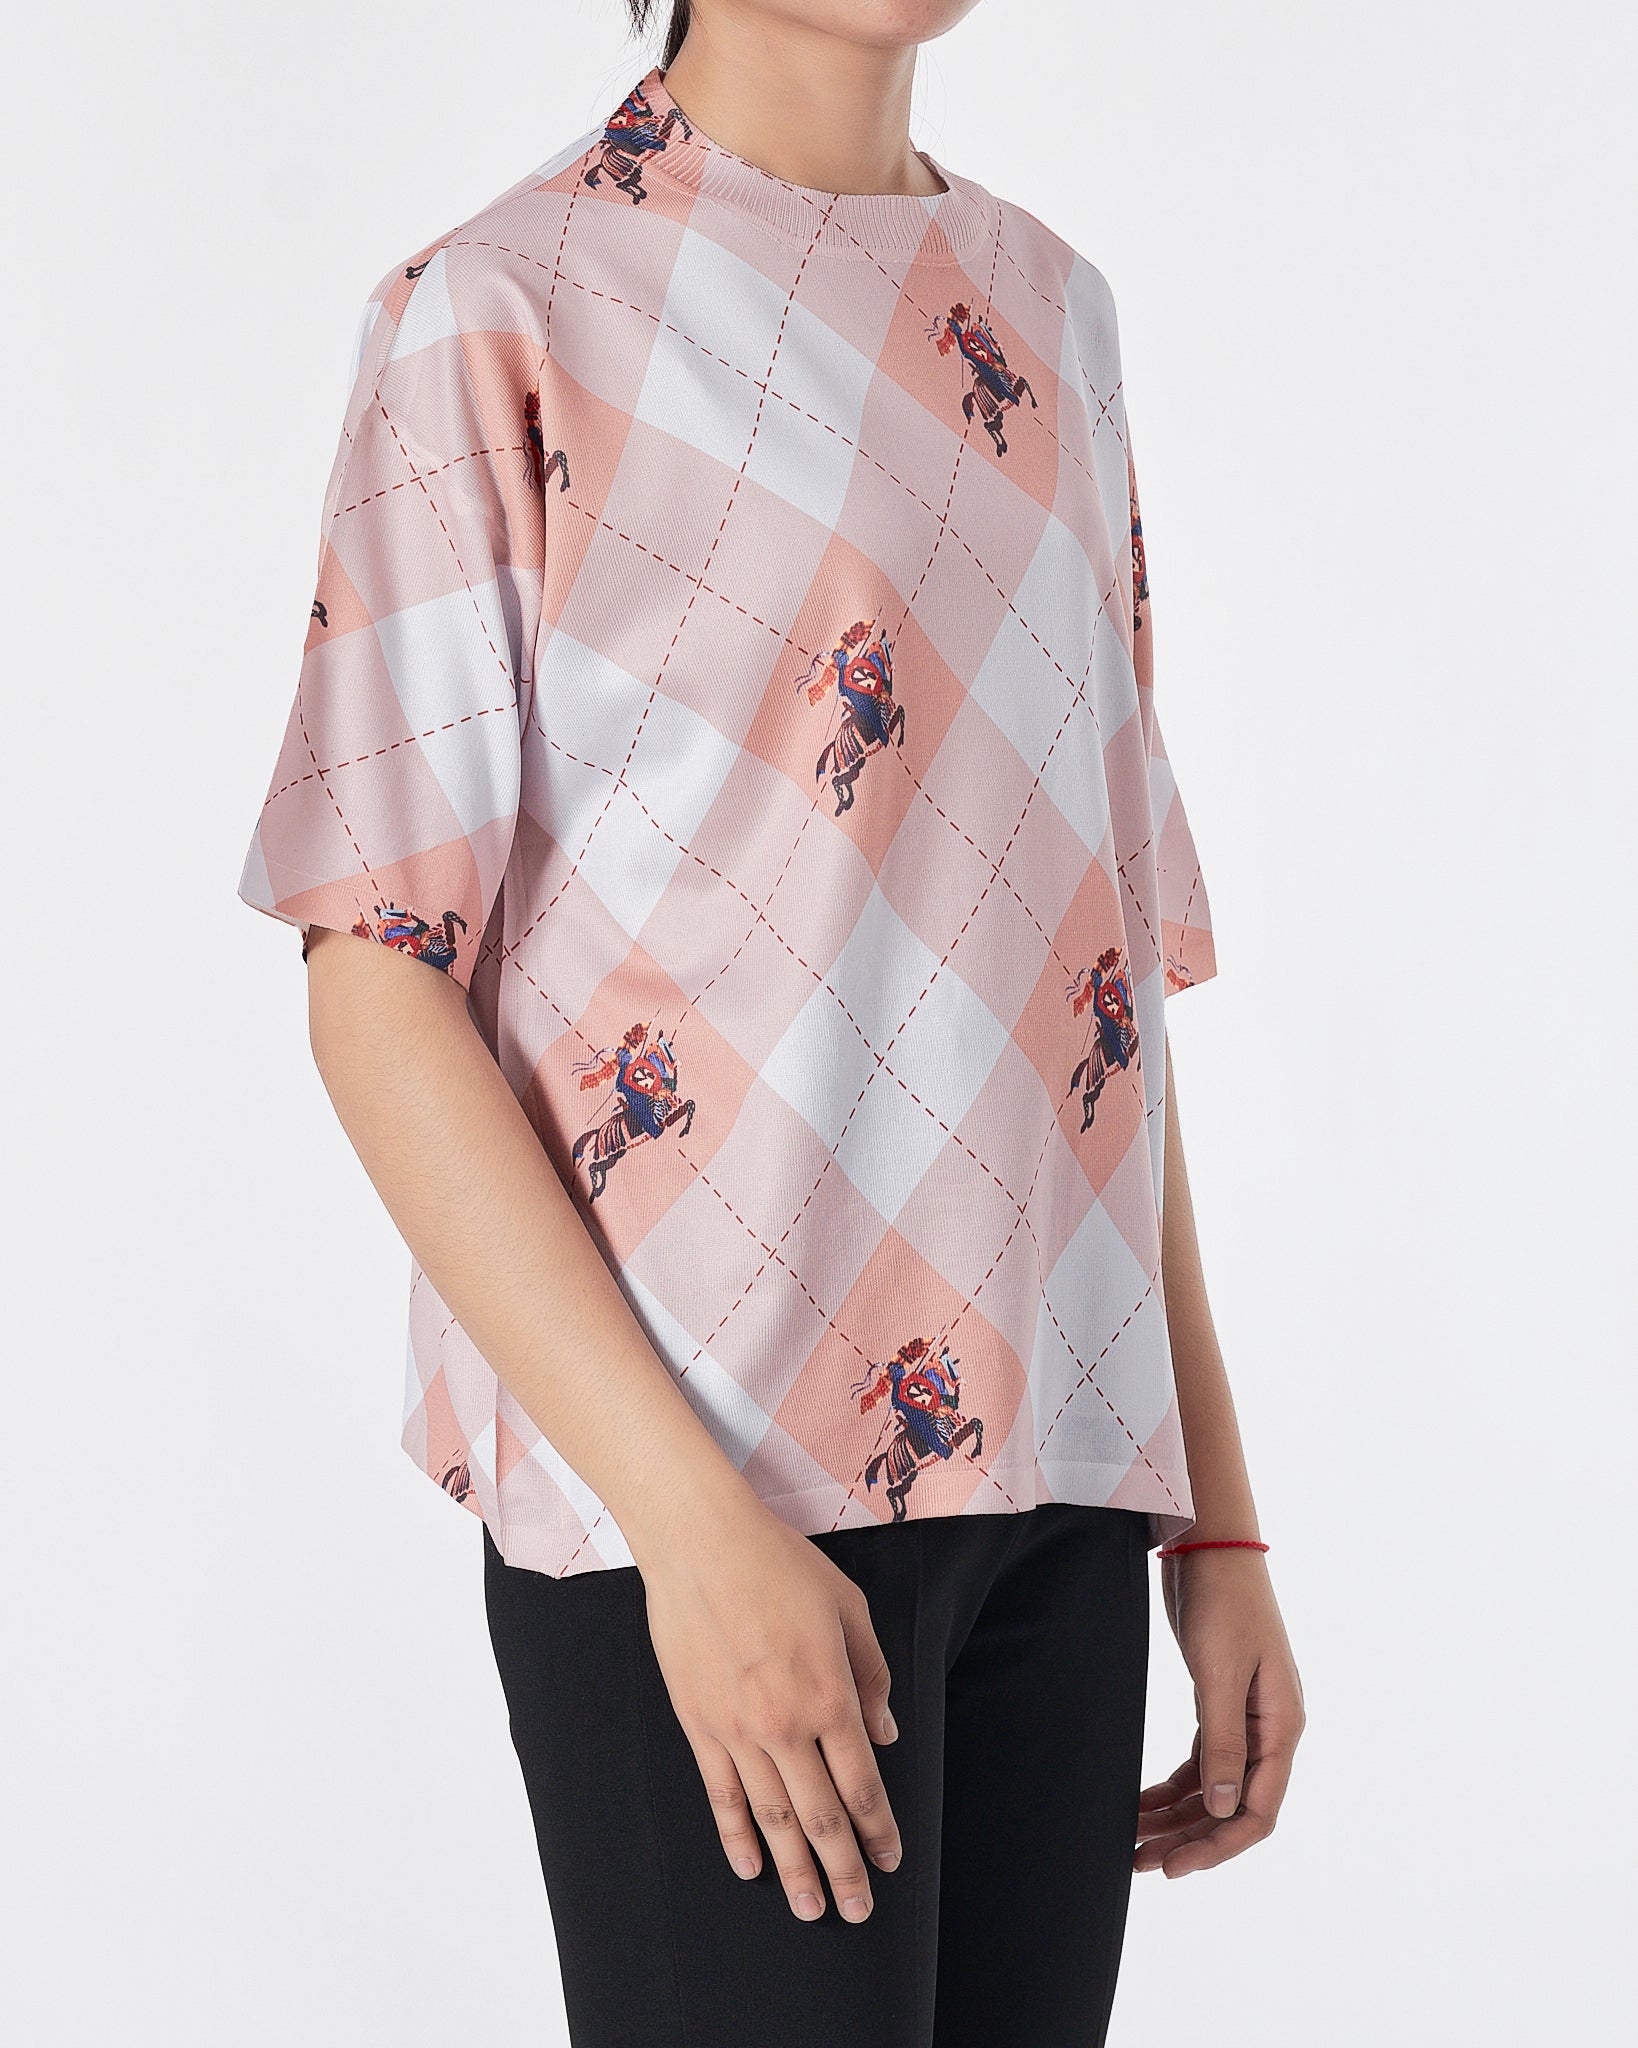 Horse Logo Over Printed Lady T-Shirt 15.90